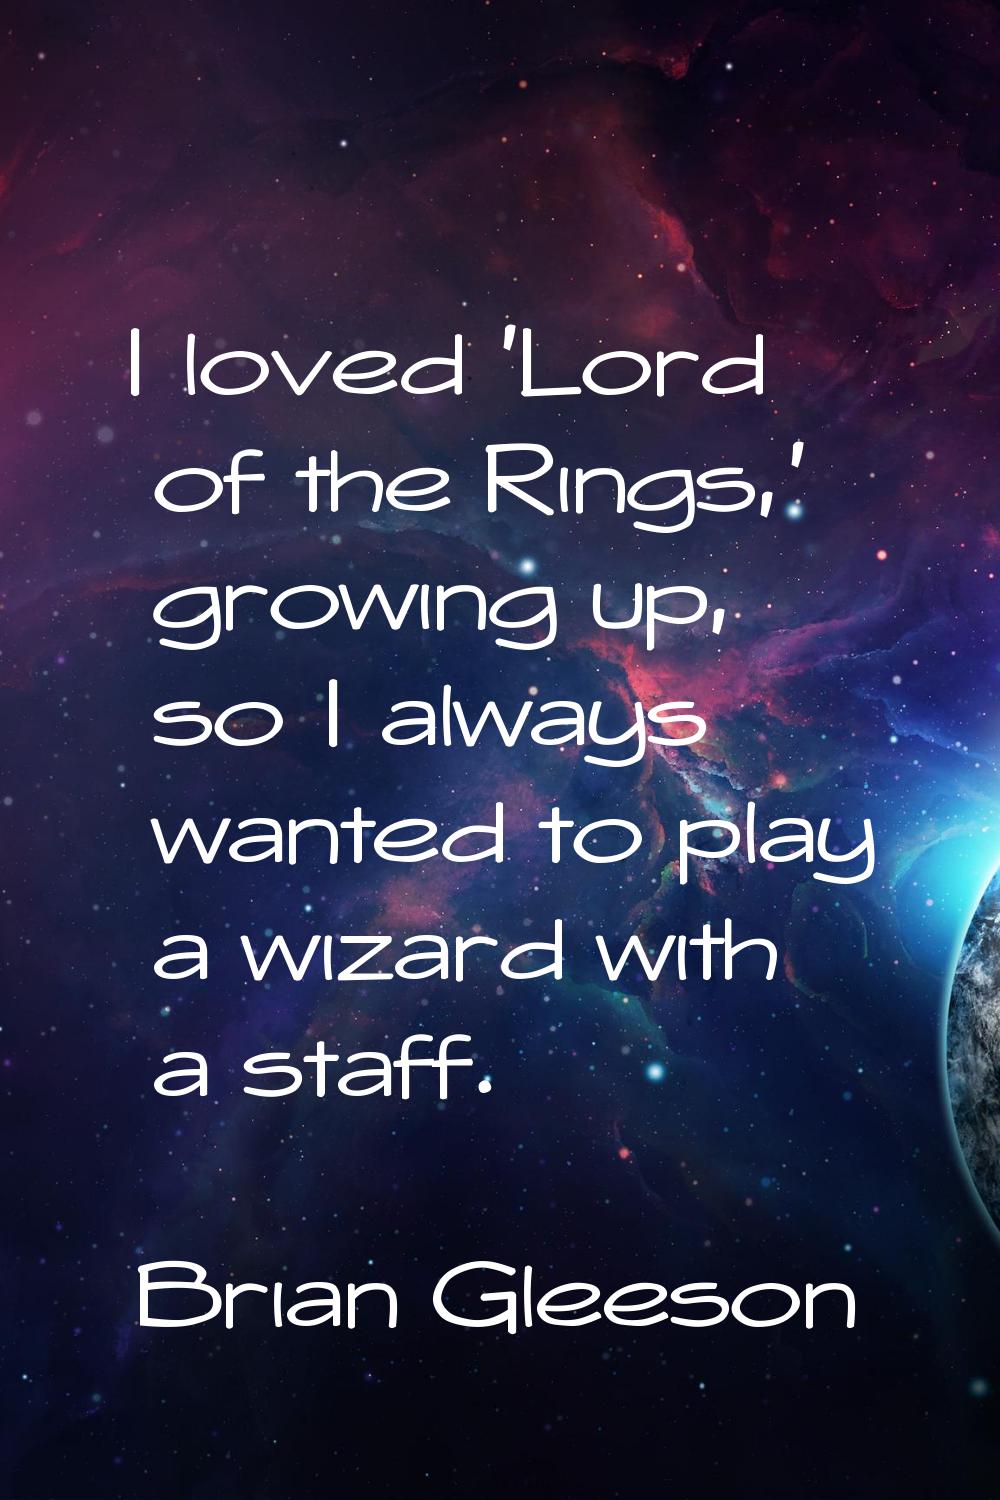 I loved 'Lord of the Rings,' growing up, so I always wanted to play a wizard with a staff.